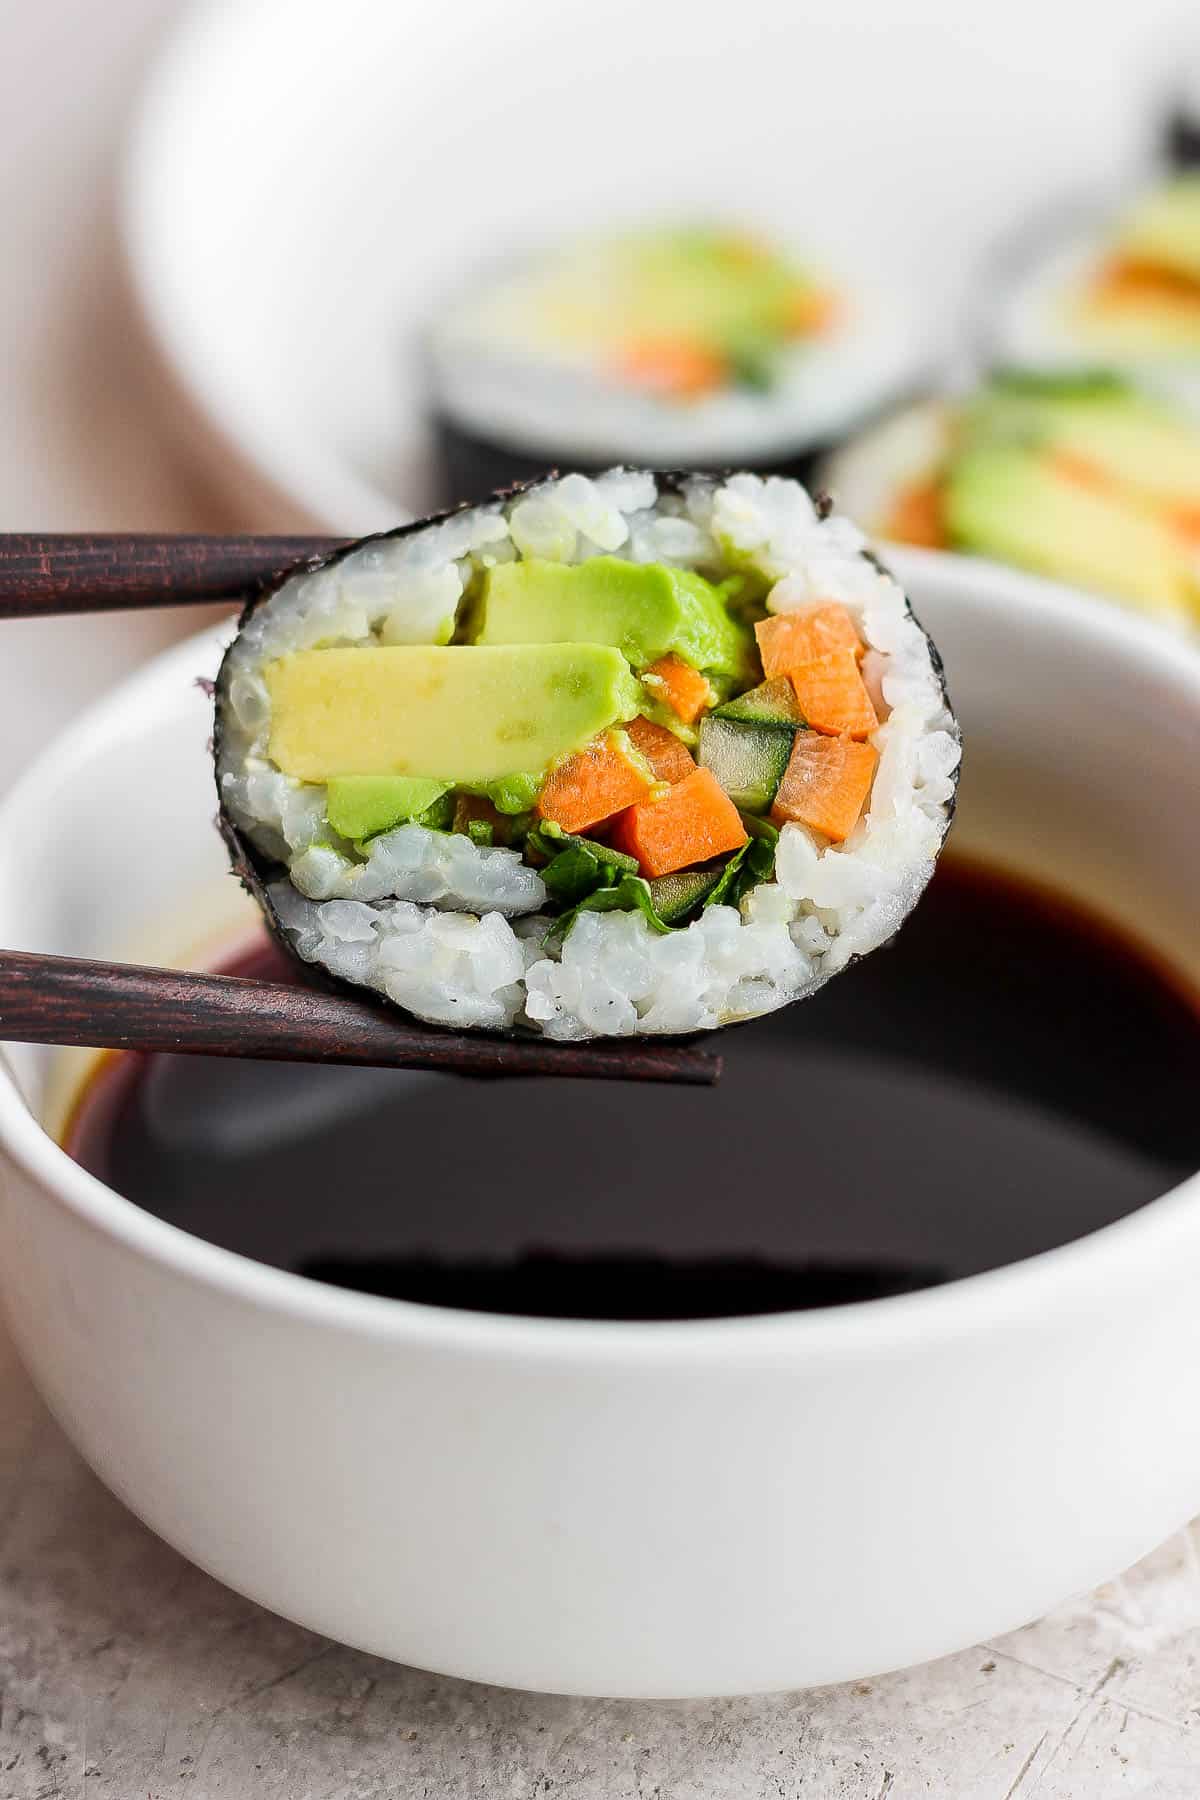 Chopsticks holding a piece of avocado roll over a small bowl of soy sauce.